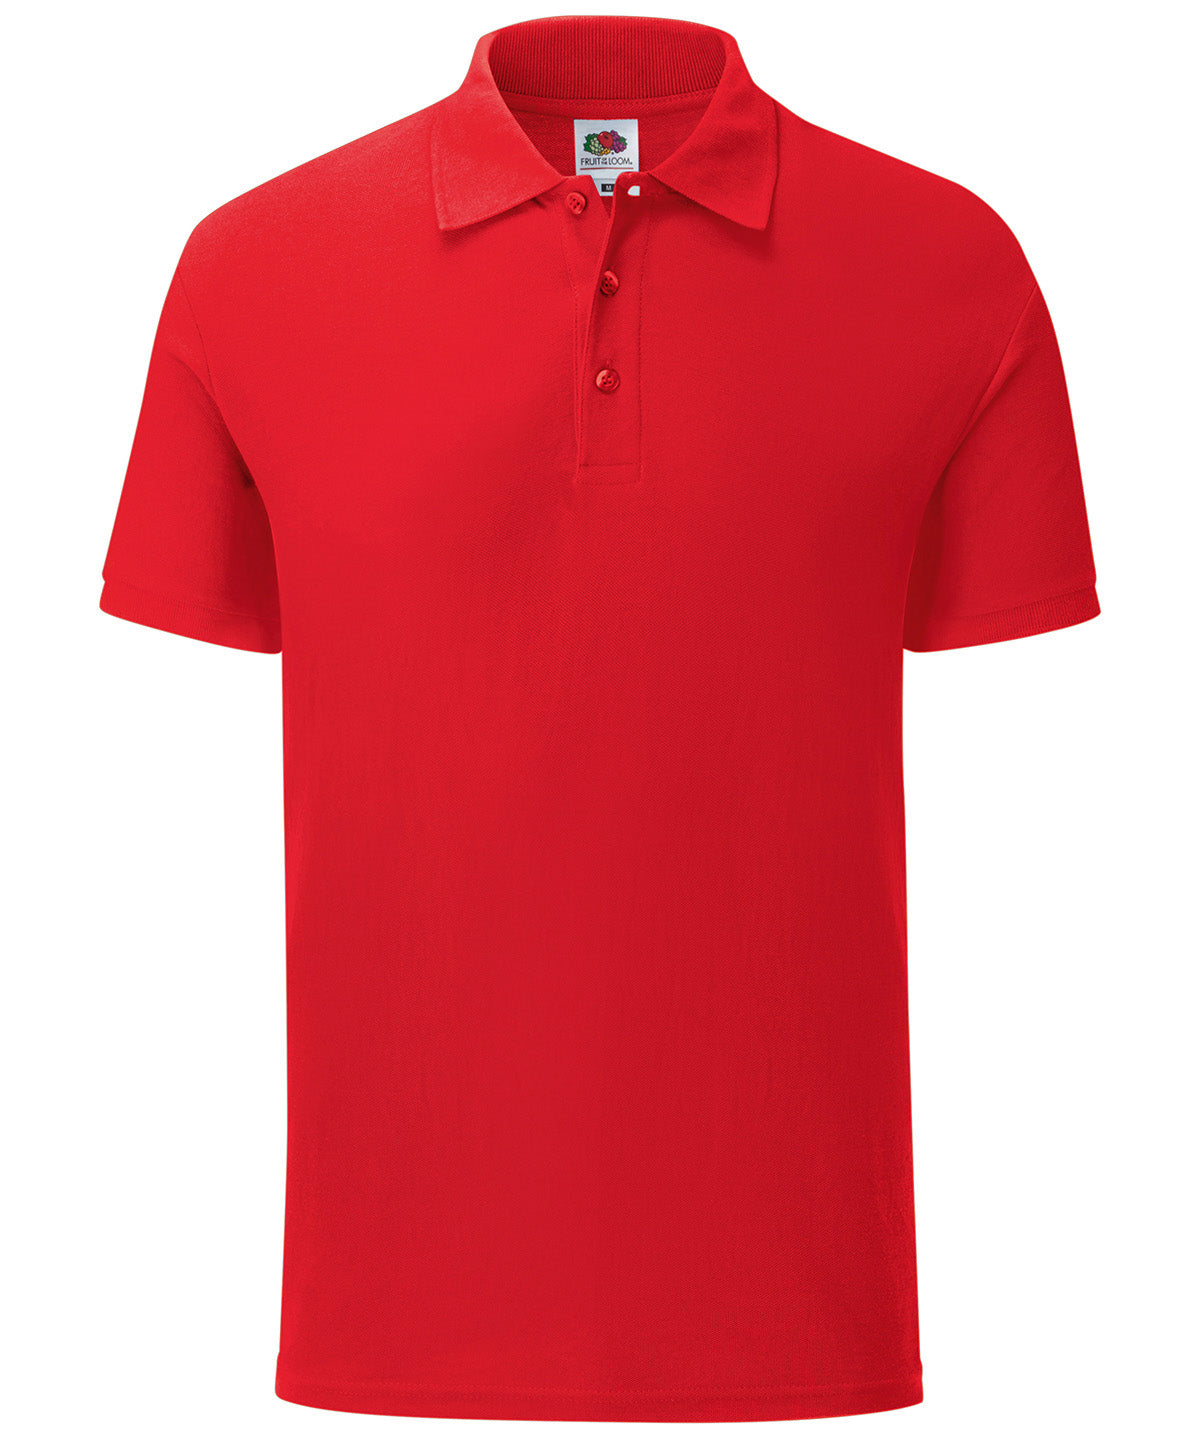 Personalised Polo Shirts - White Fruit of the Loom Iconic polo